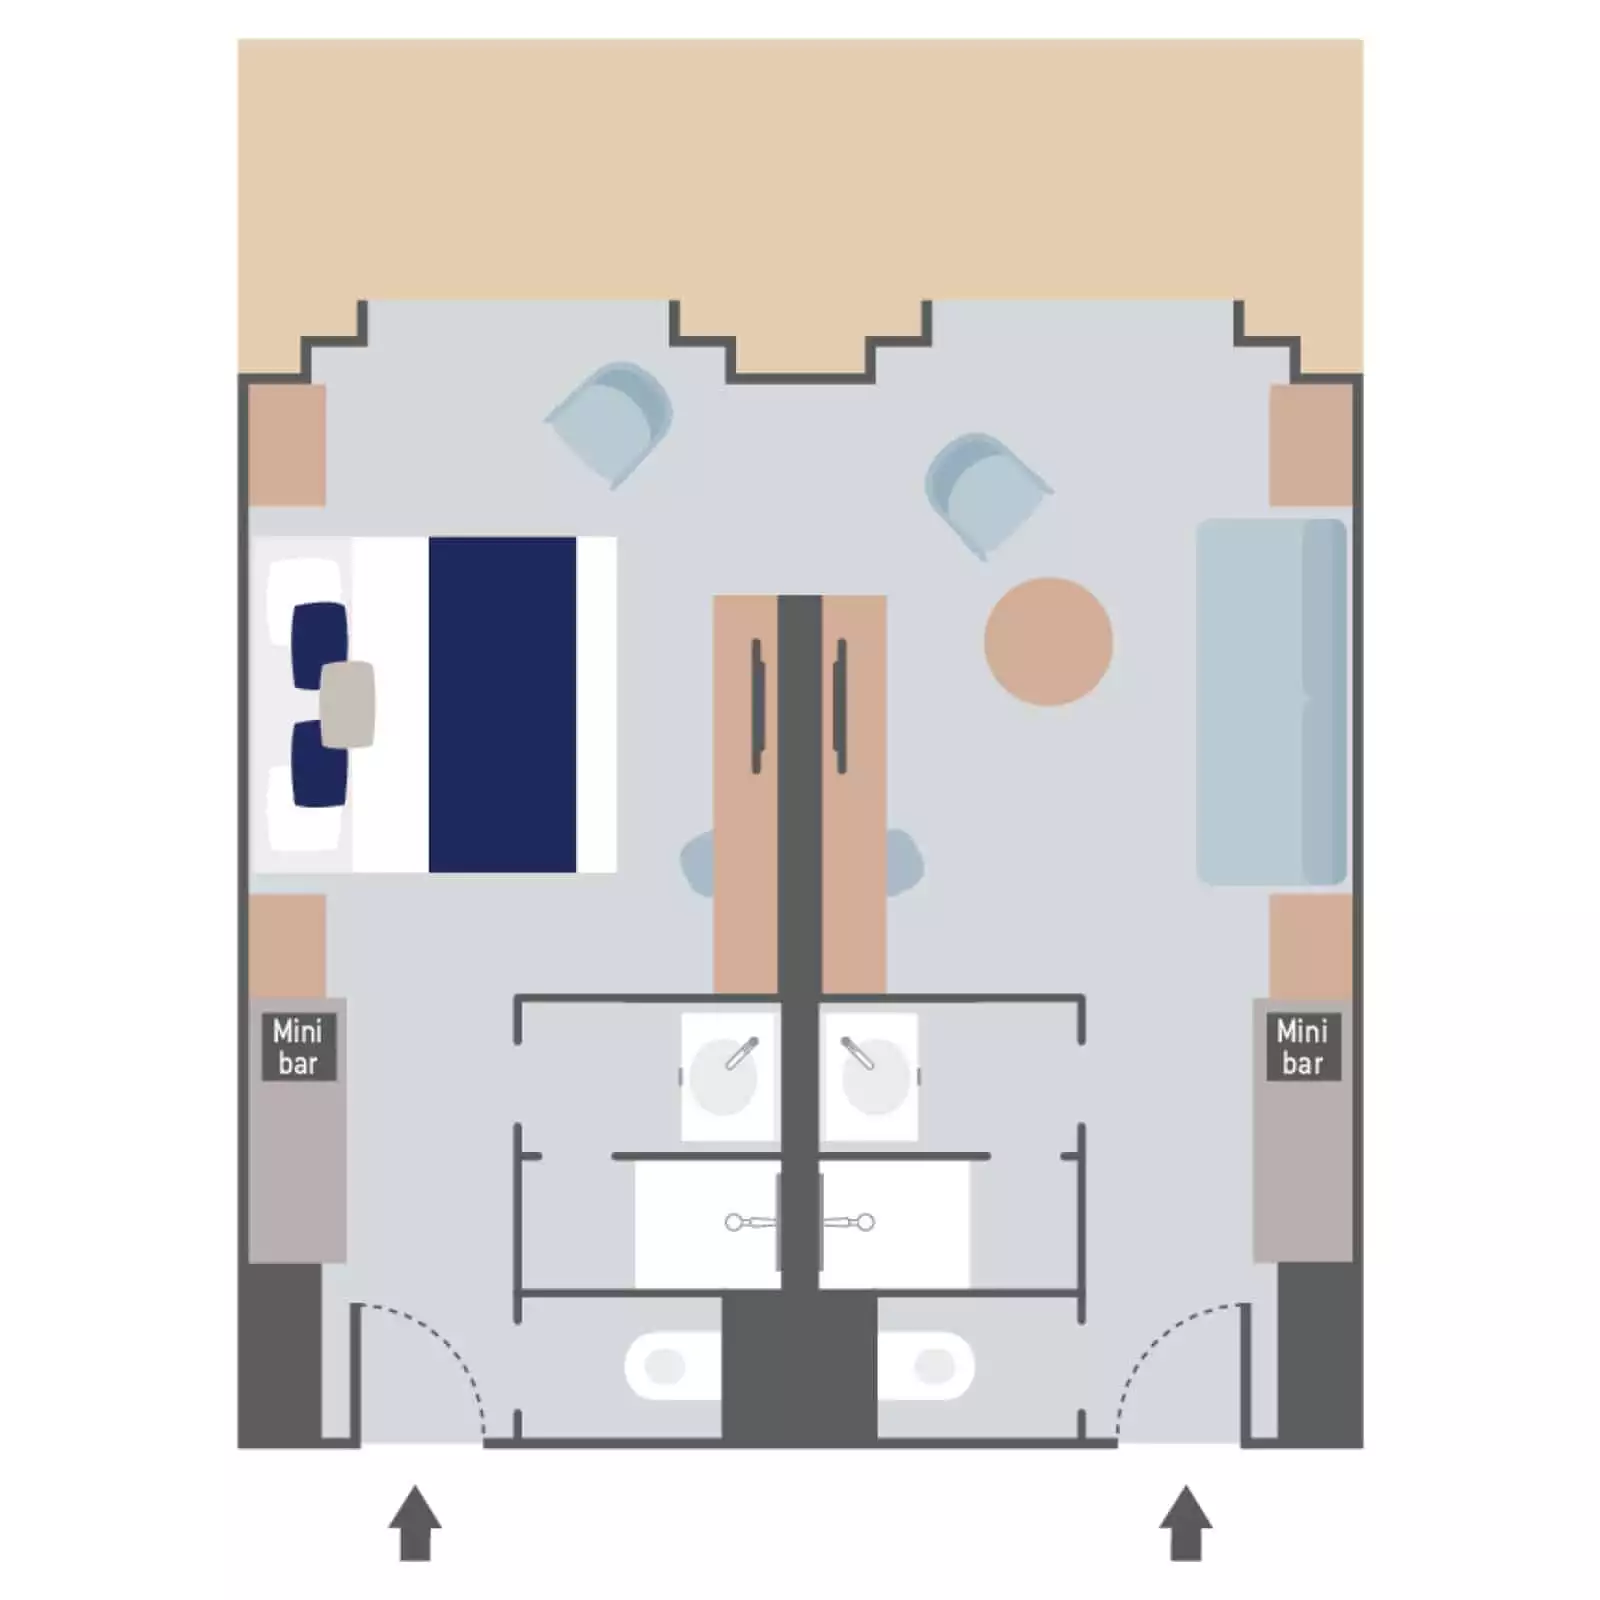 Layout of Prestige Suite aboard Le Commandant Charcot hybrid electric ship with interconnecting rooms, double bed, couch, 2 bathrooms, 2 closets & 2 doorways to a double balcony.